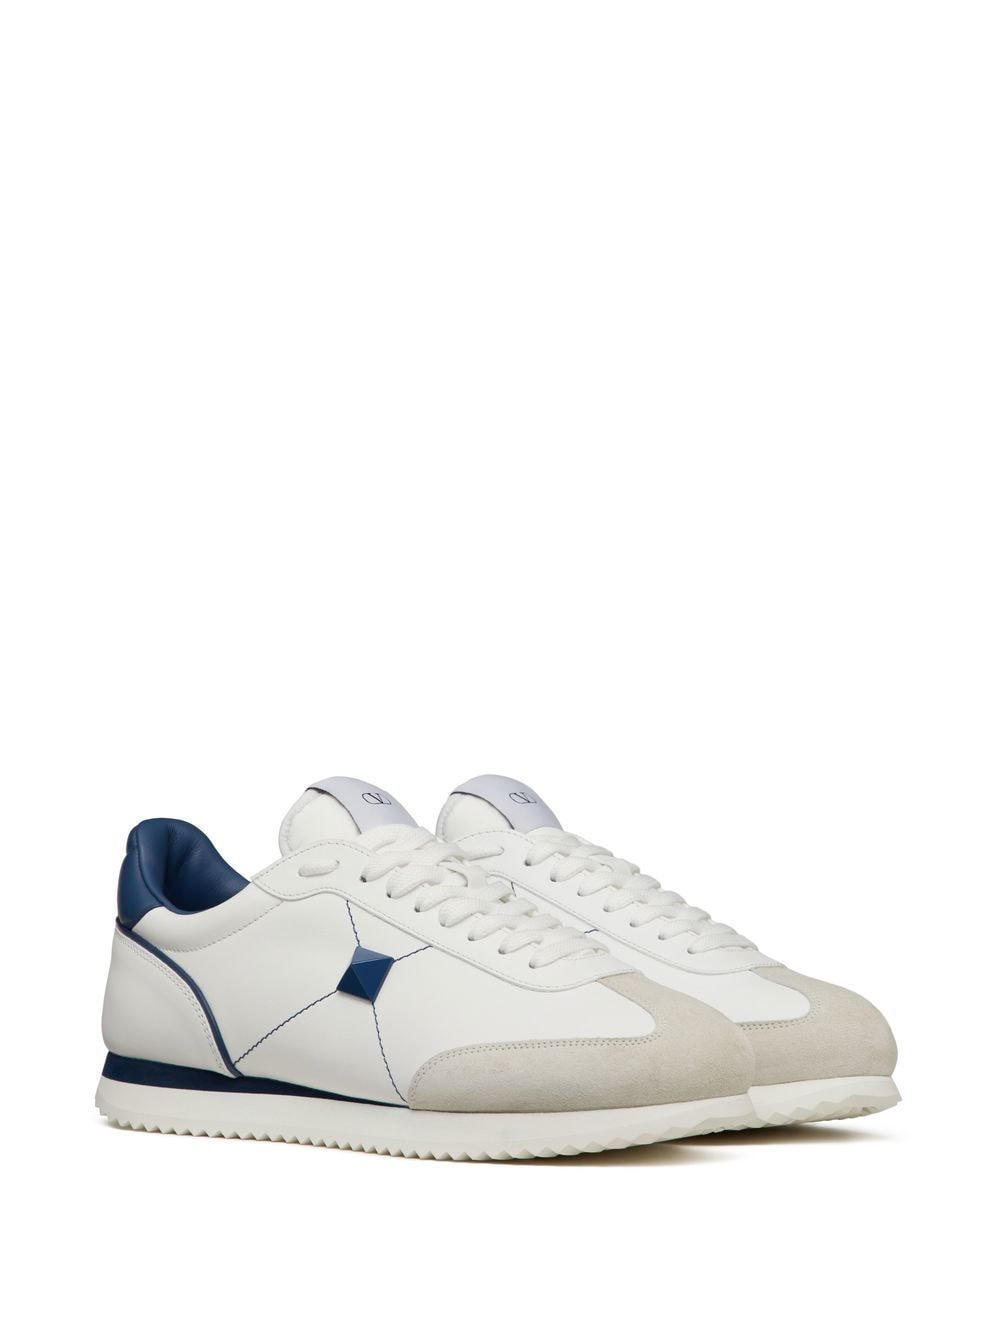 White/blue Stud Around low-top sneakers